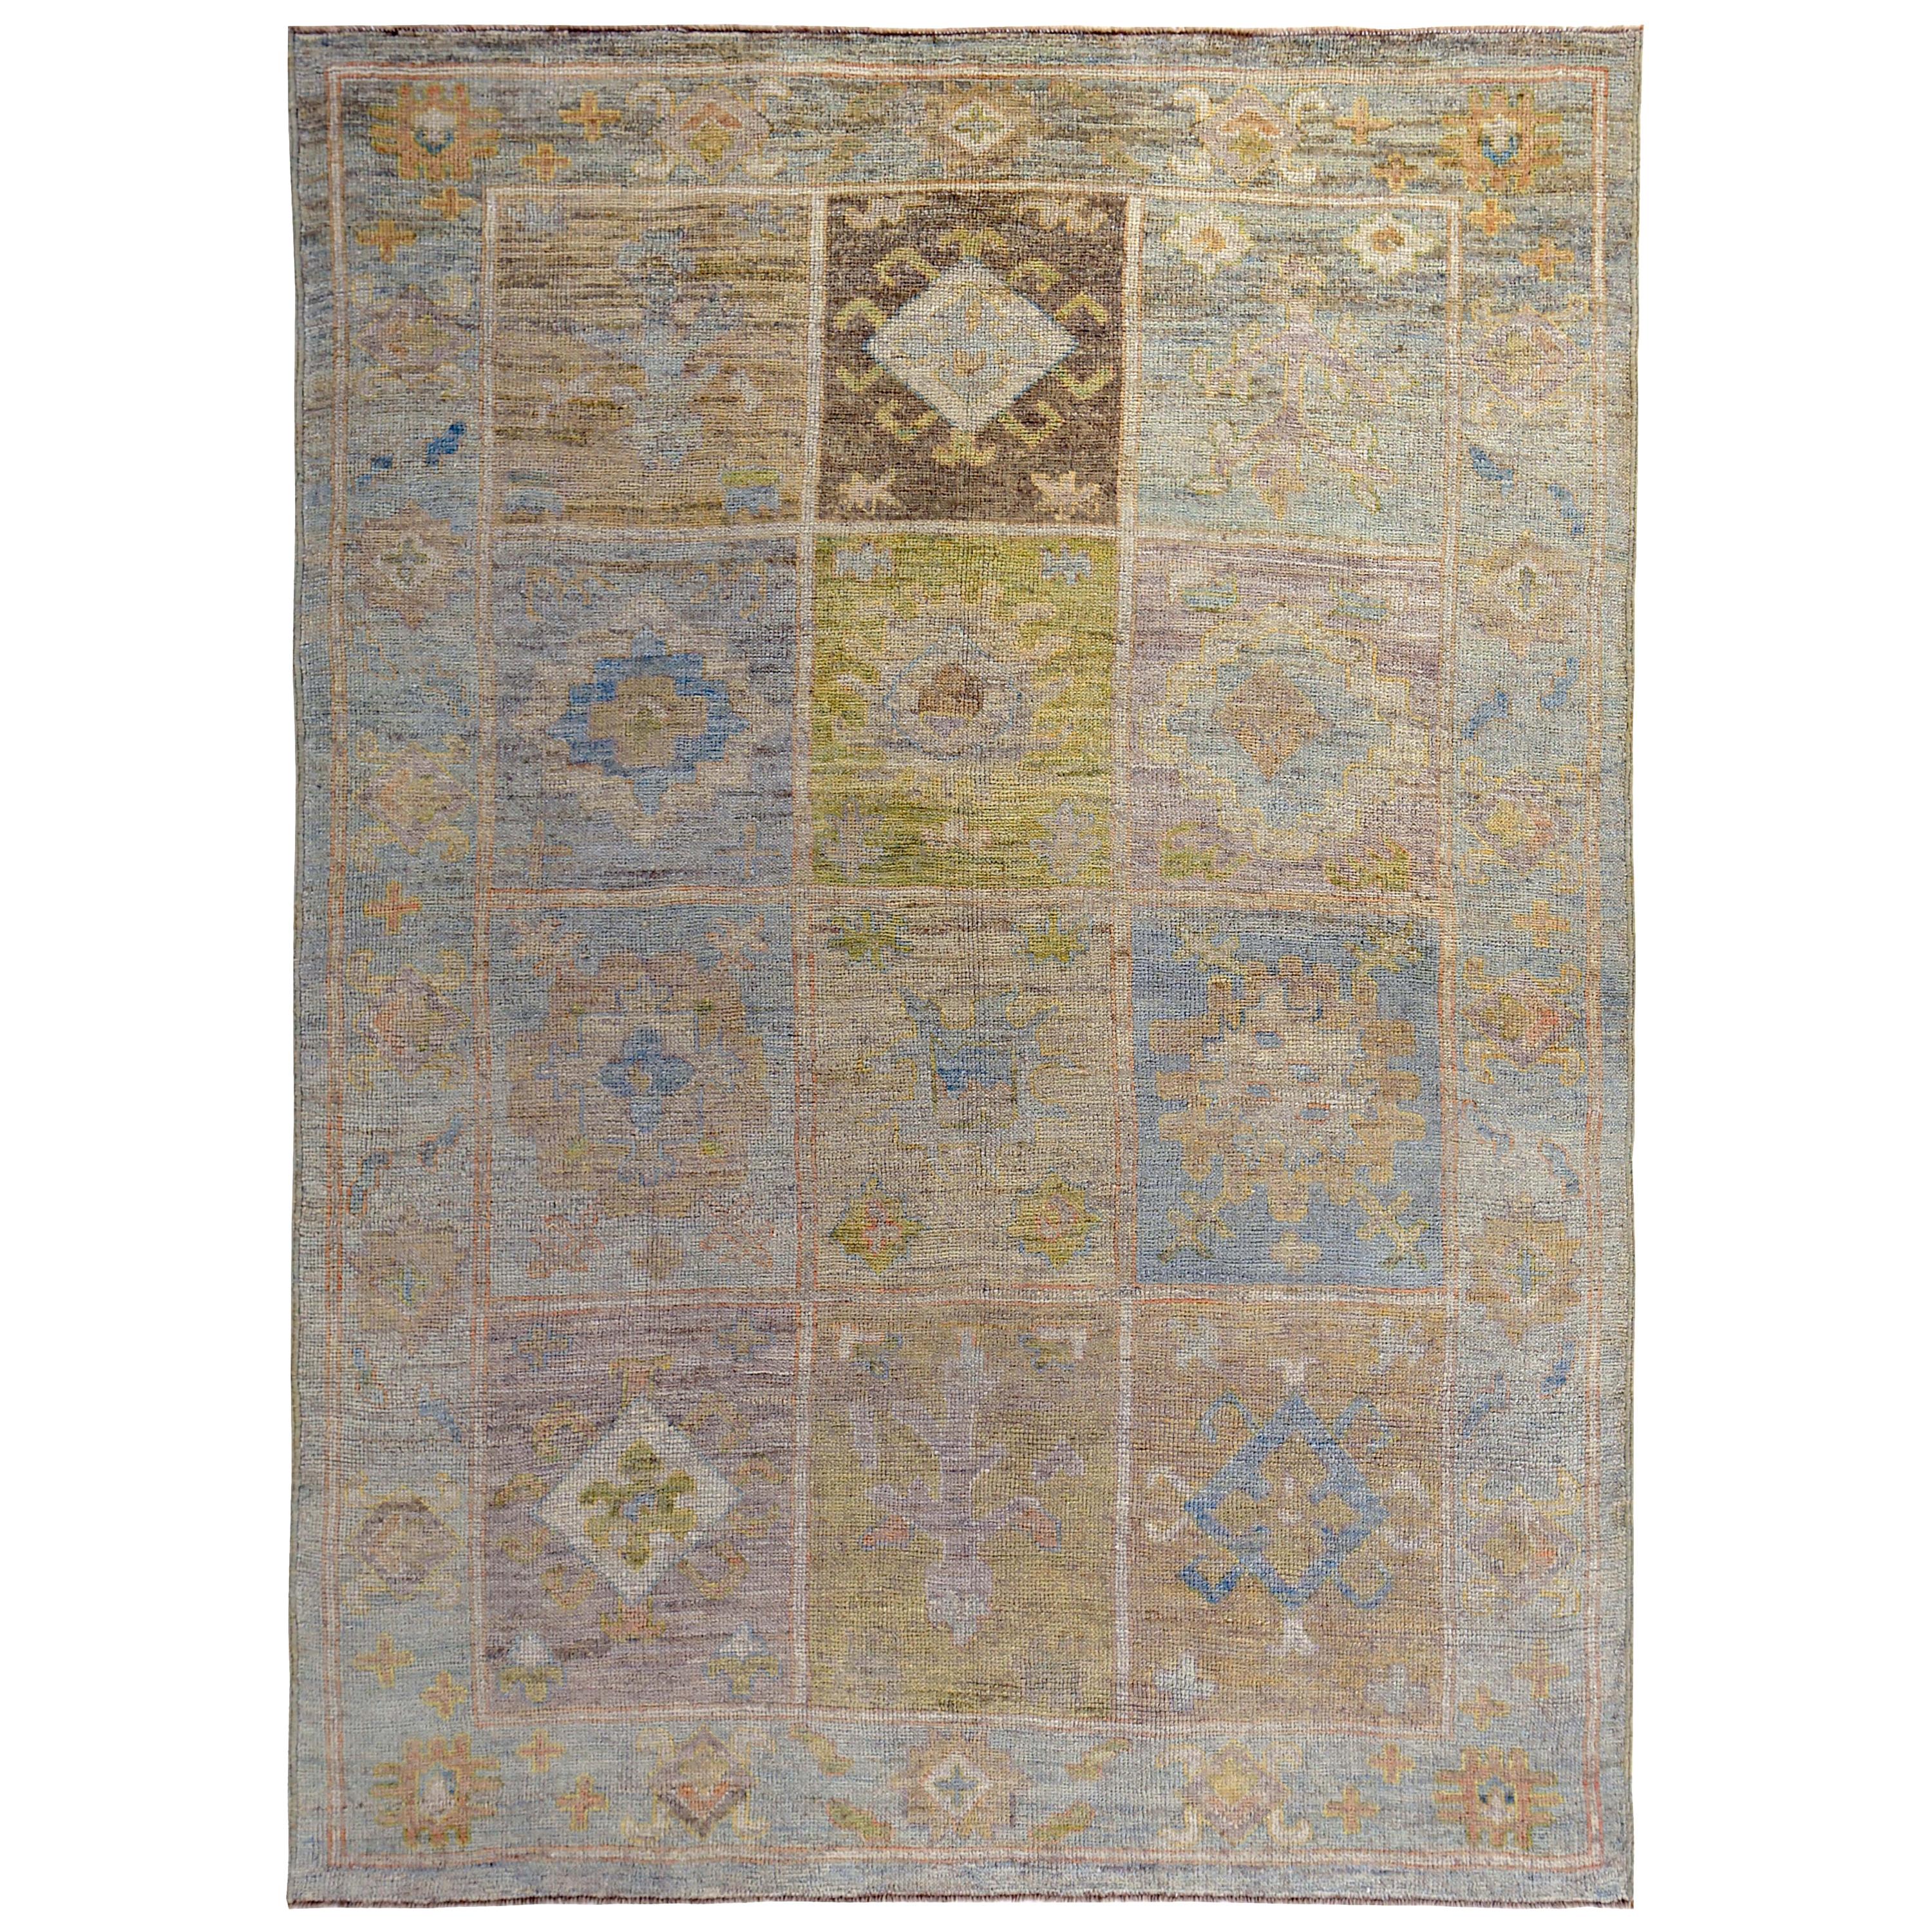 New Turkish Oushak Rug with Yellow Orange and Green Floral Details on Blue Field For Sale